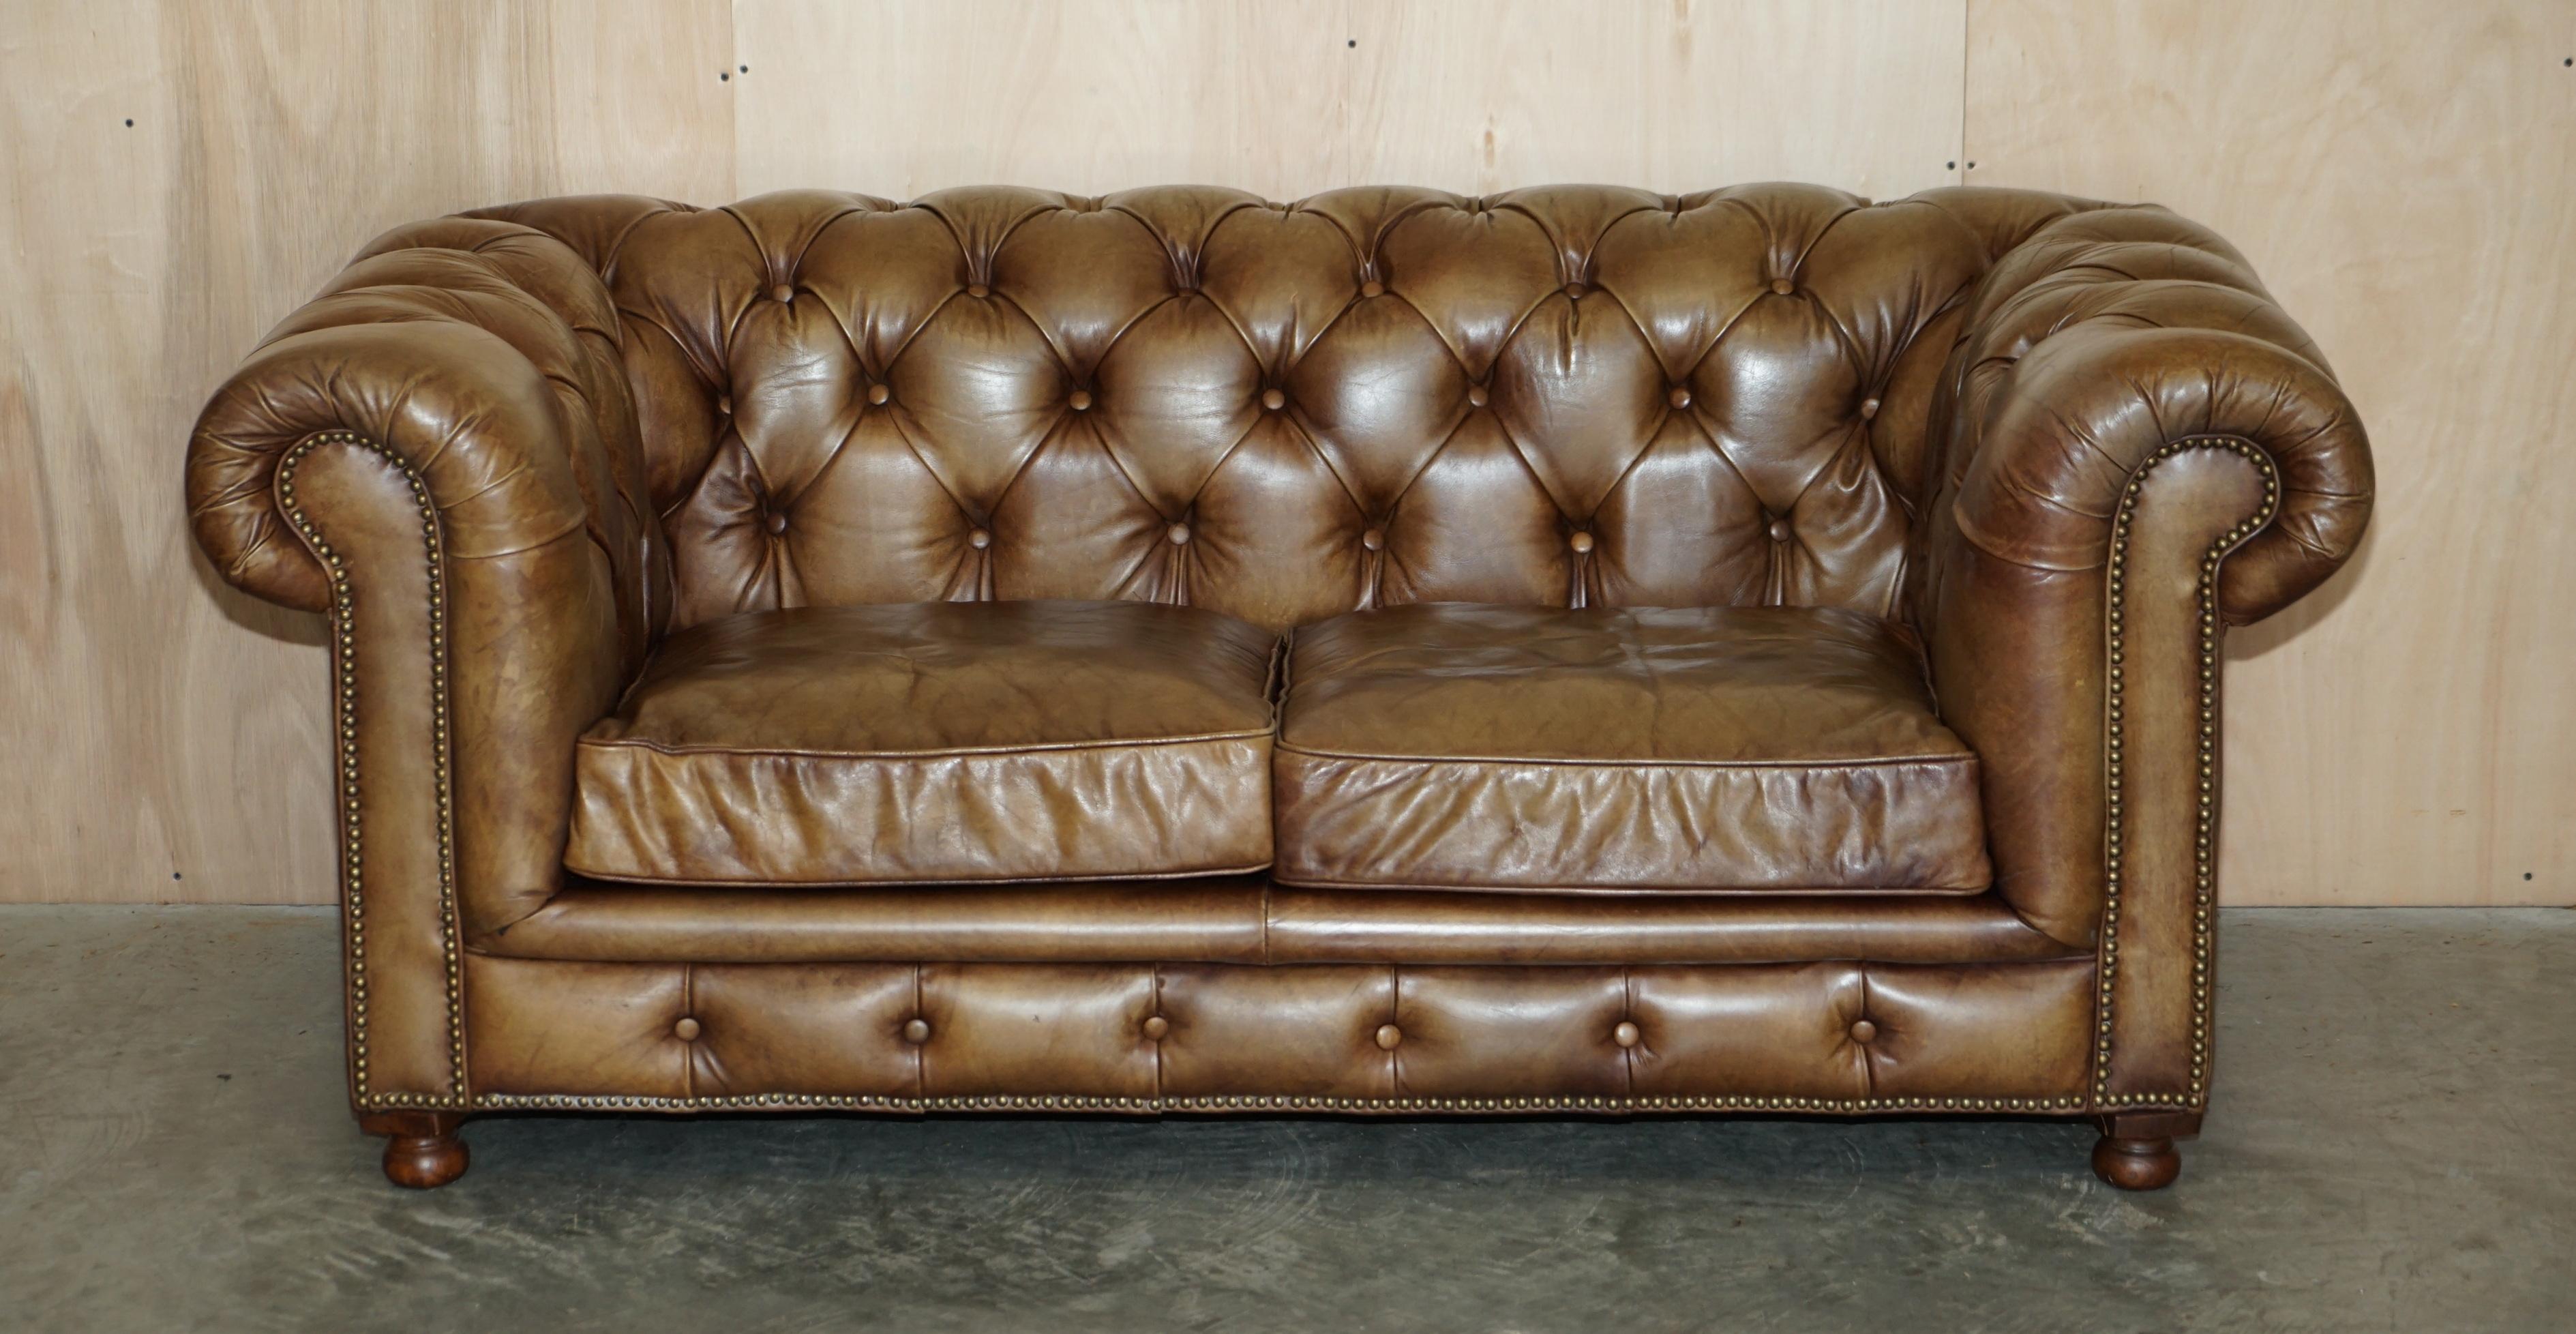 Royal House Antiques

Royal House Antiques is delighted to offer for sale this Stunning Timothy Oulton, Halo Westminster, chestnut brown leather sofa RRP £3,839

Please note the delivery fee listed is just a guide, it covers within the M25 only for